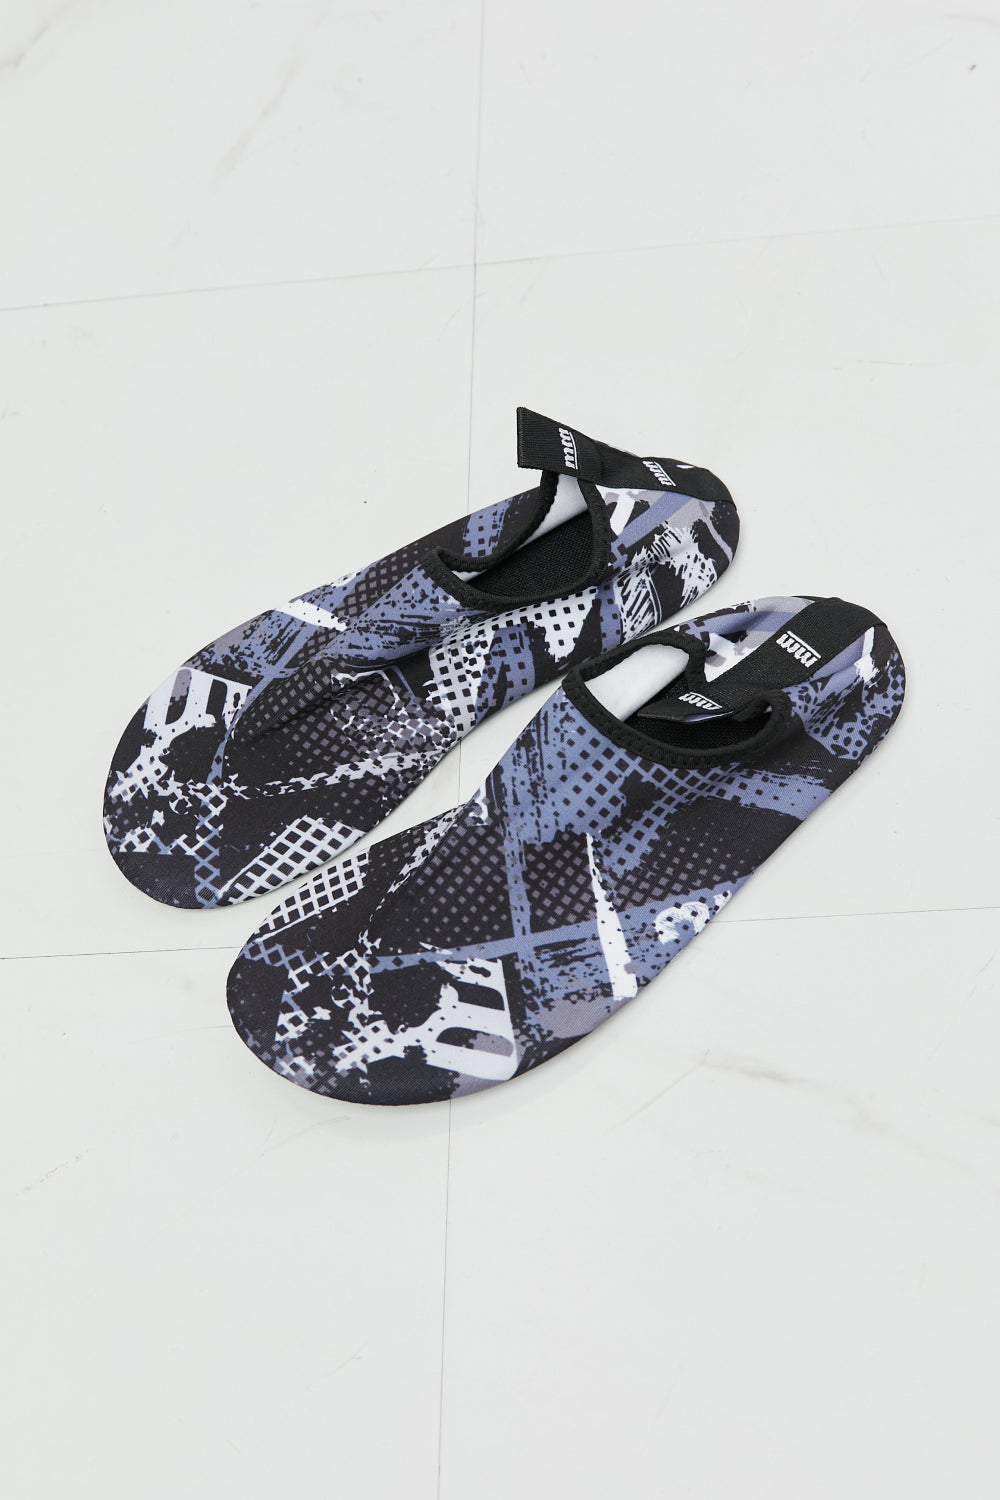 MMshoes On The Shore Water Shoes in Black Pattern - Online Only